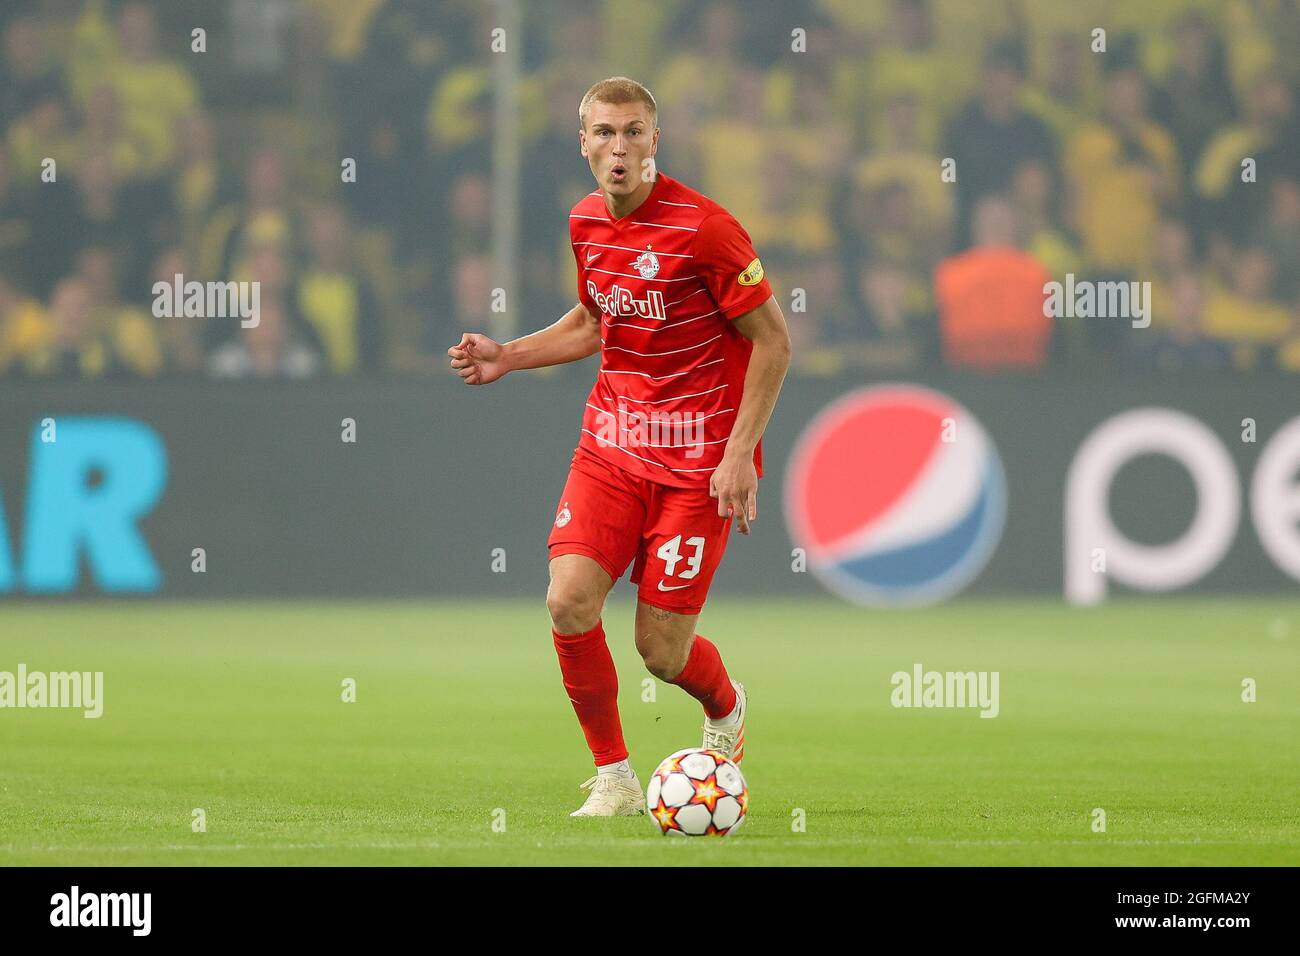 Broendby, Denmark. 25th Aug, 2021. Rasmus Kristensen (43) of FC Bull Salzburg seen during the UEFA Champions League qualification match between IF and FC Red Bull at Broendby Stadion